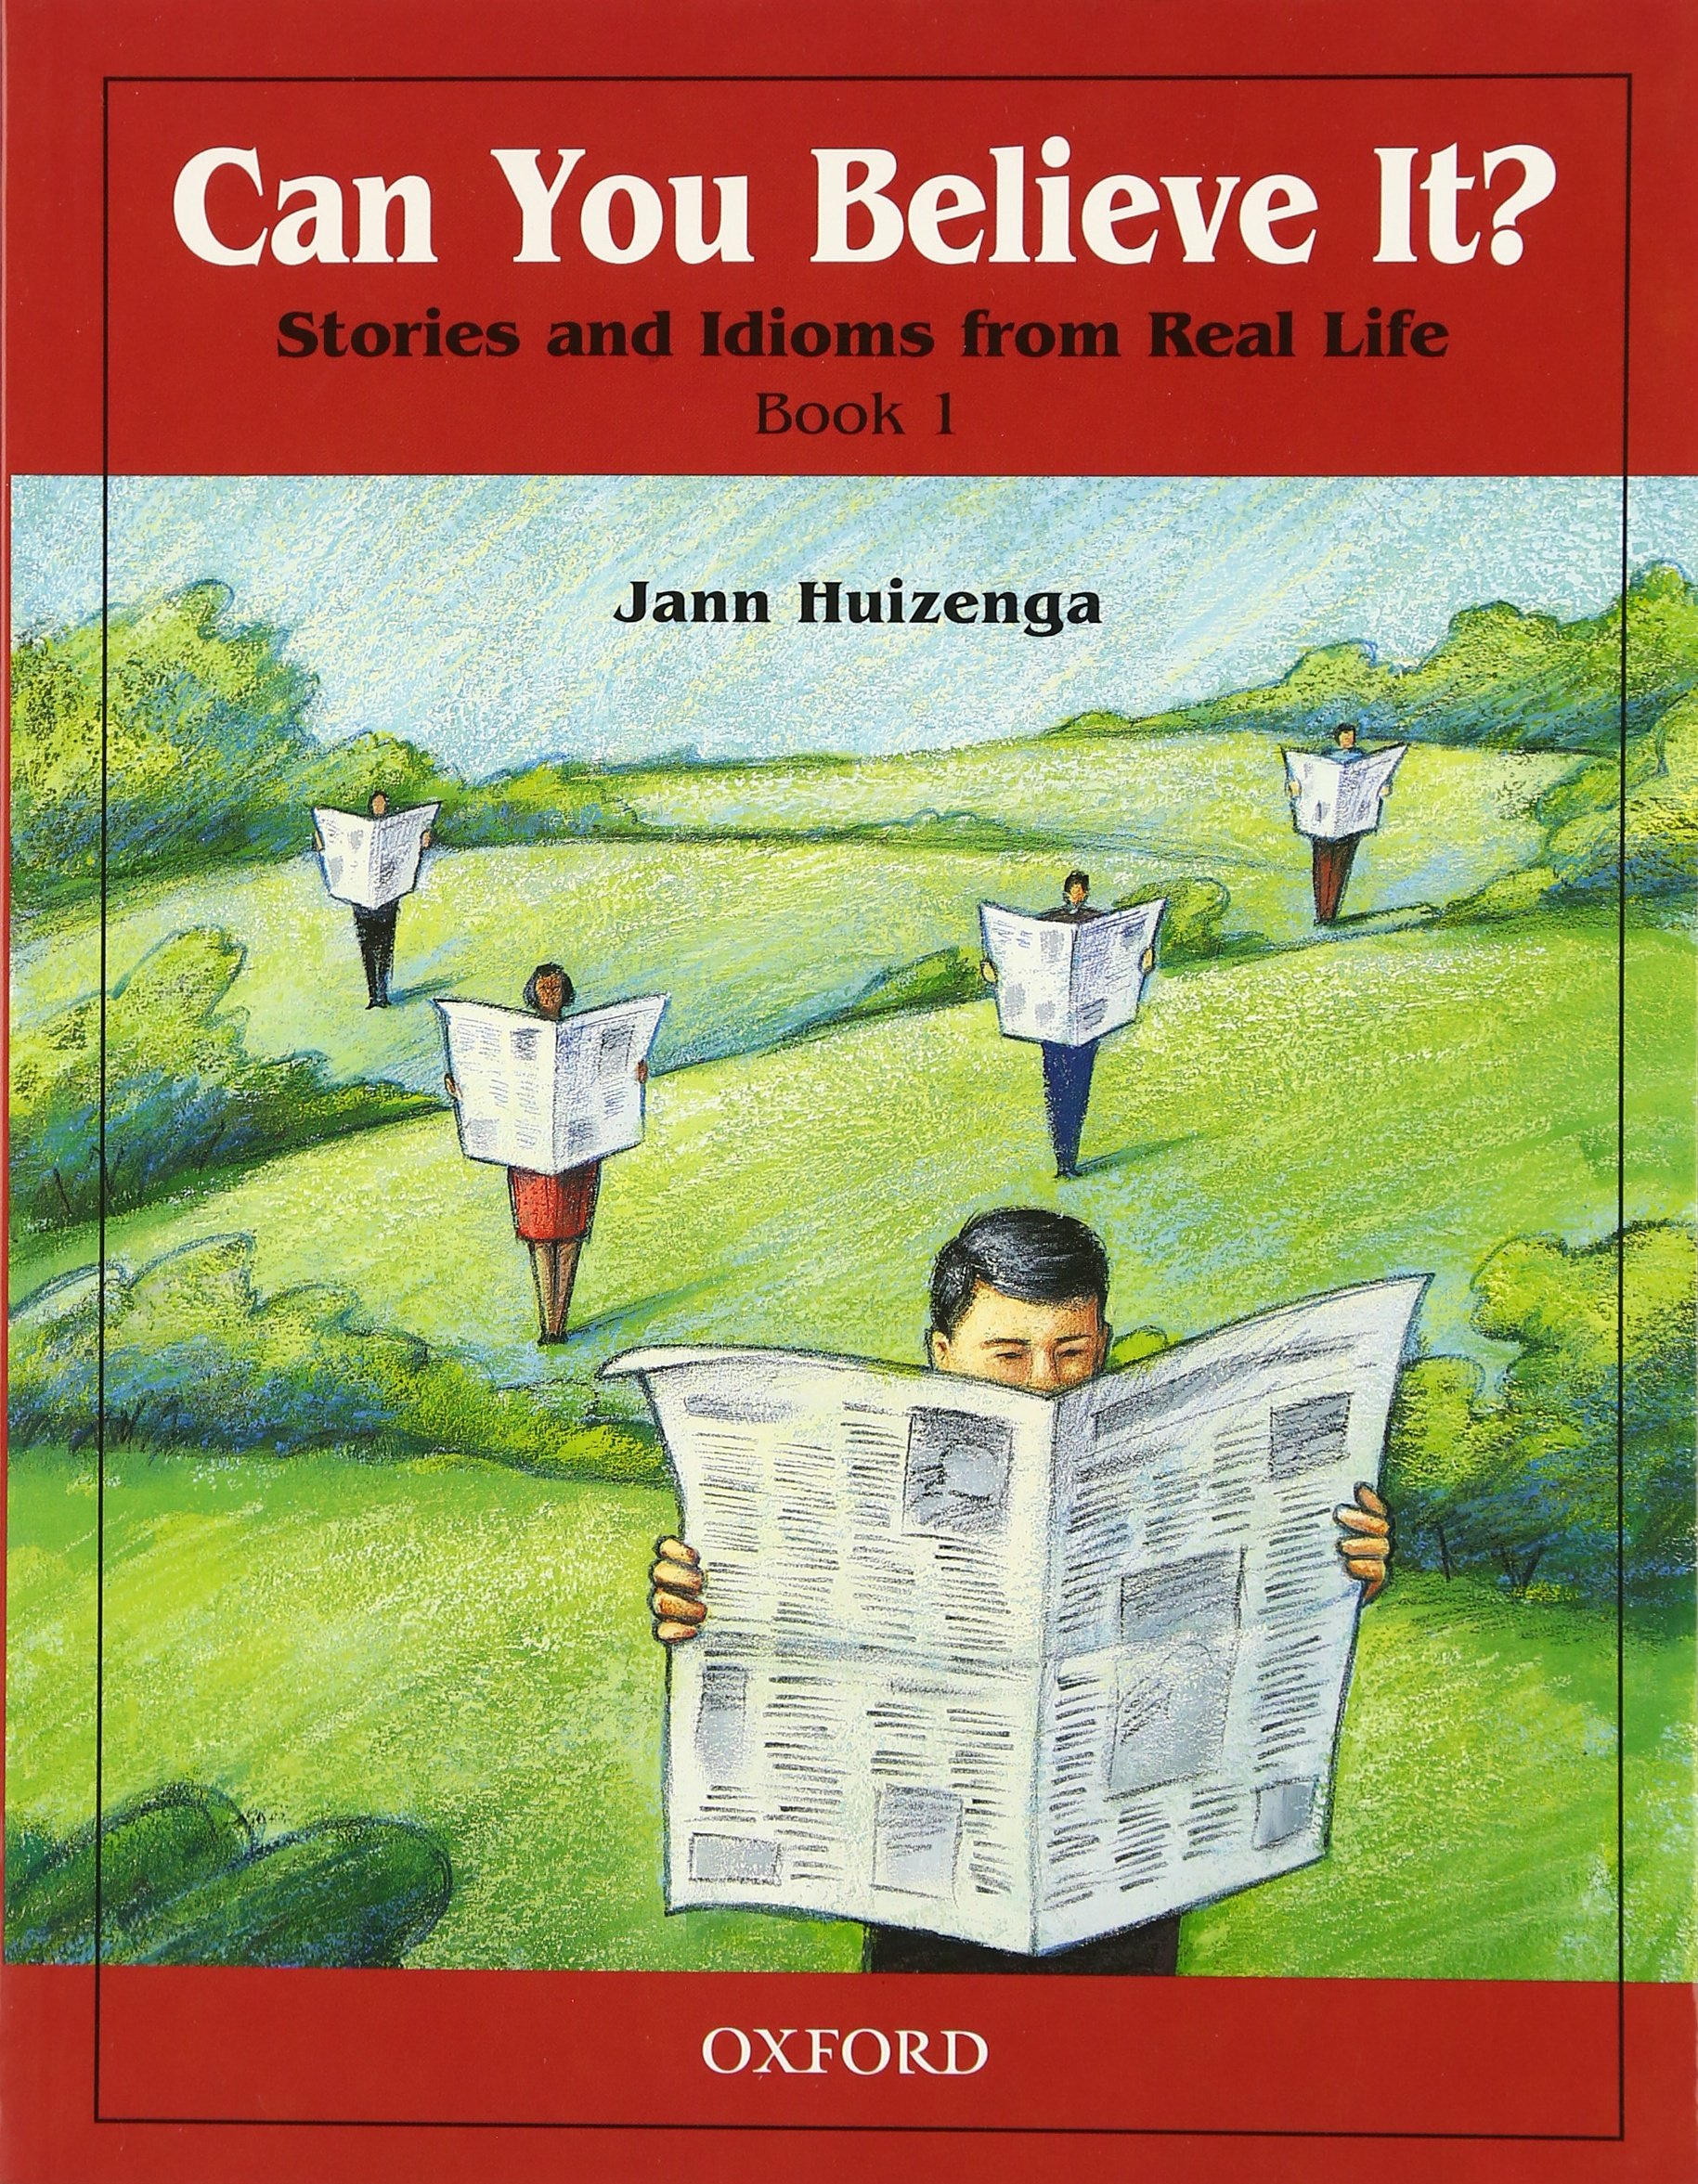 Can you believe it? stories and idioms from real life BOOK1